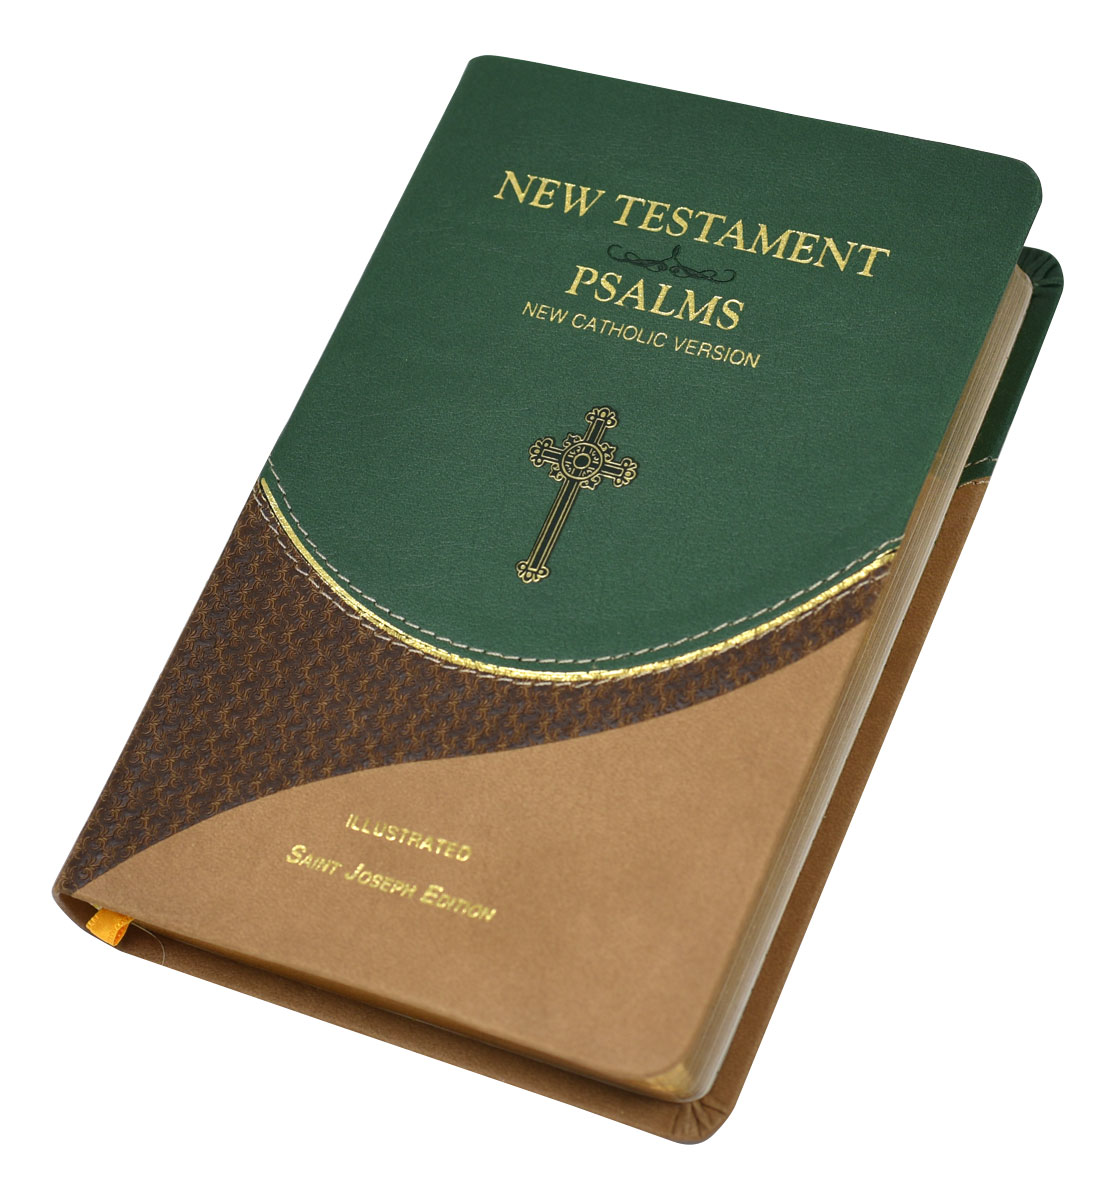 St. Joseph New Catholic Version New Testament and Psalms Green/Brown Dura-Lux 647/19GN